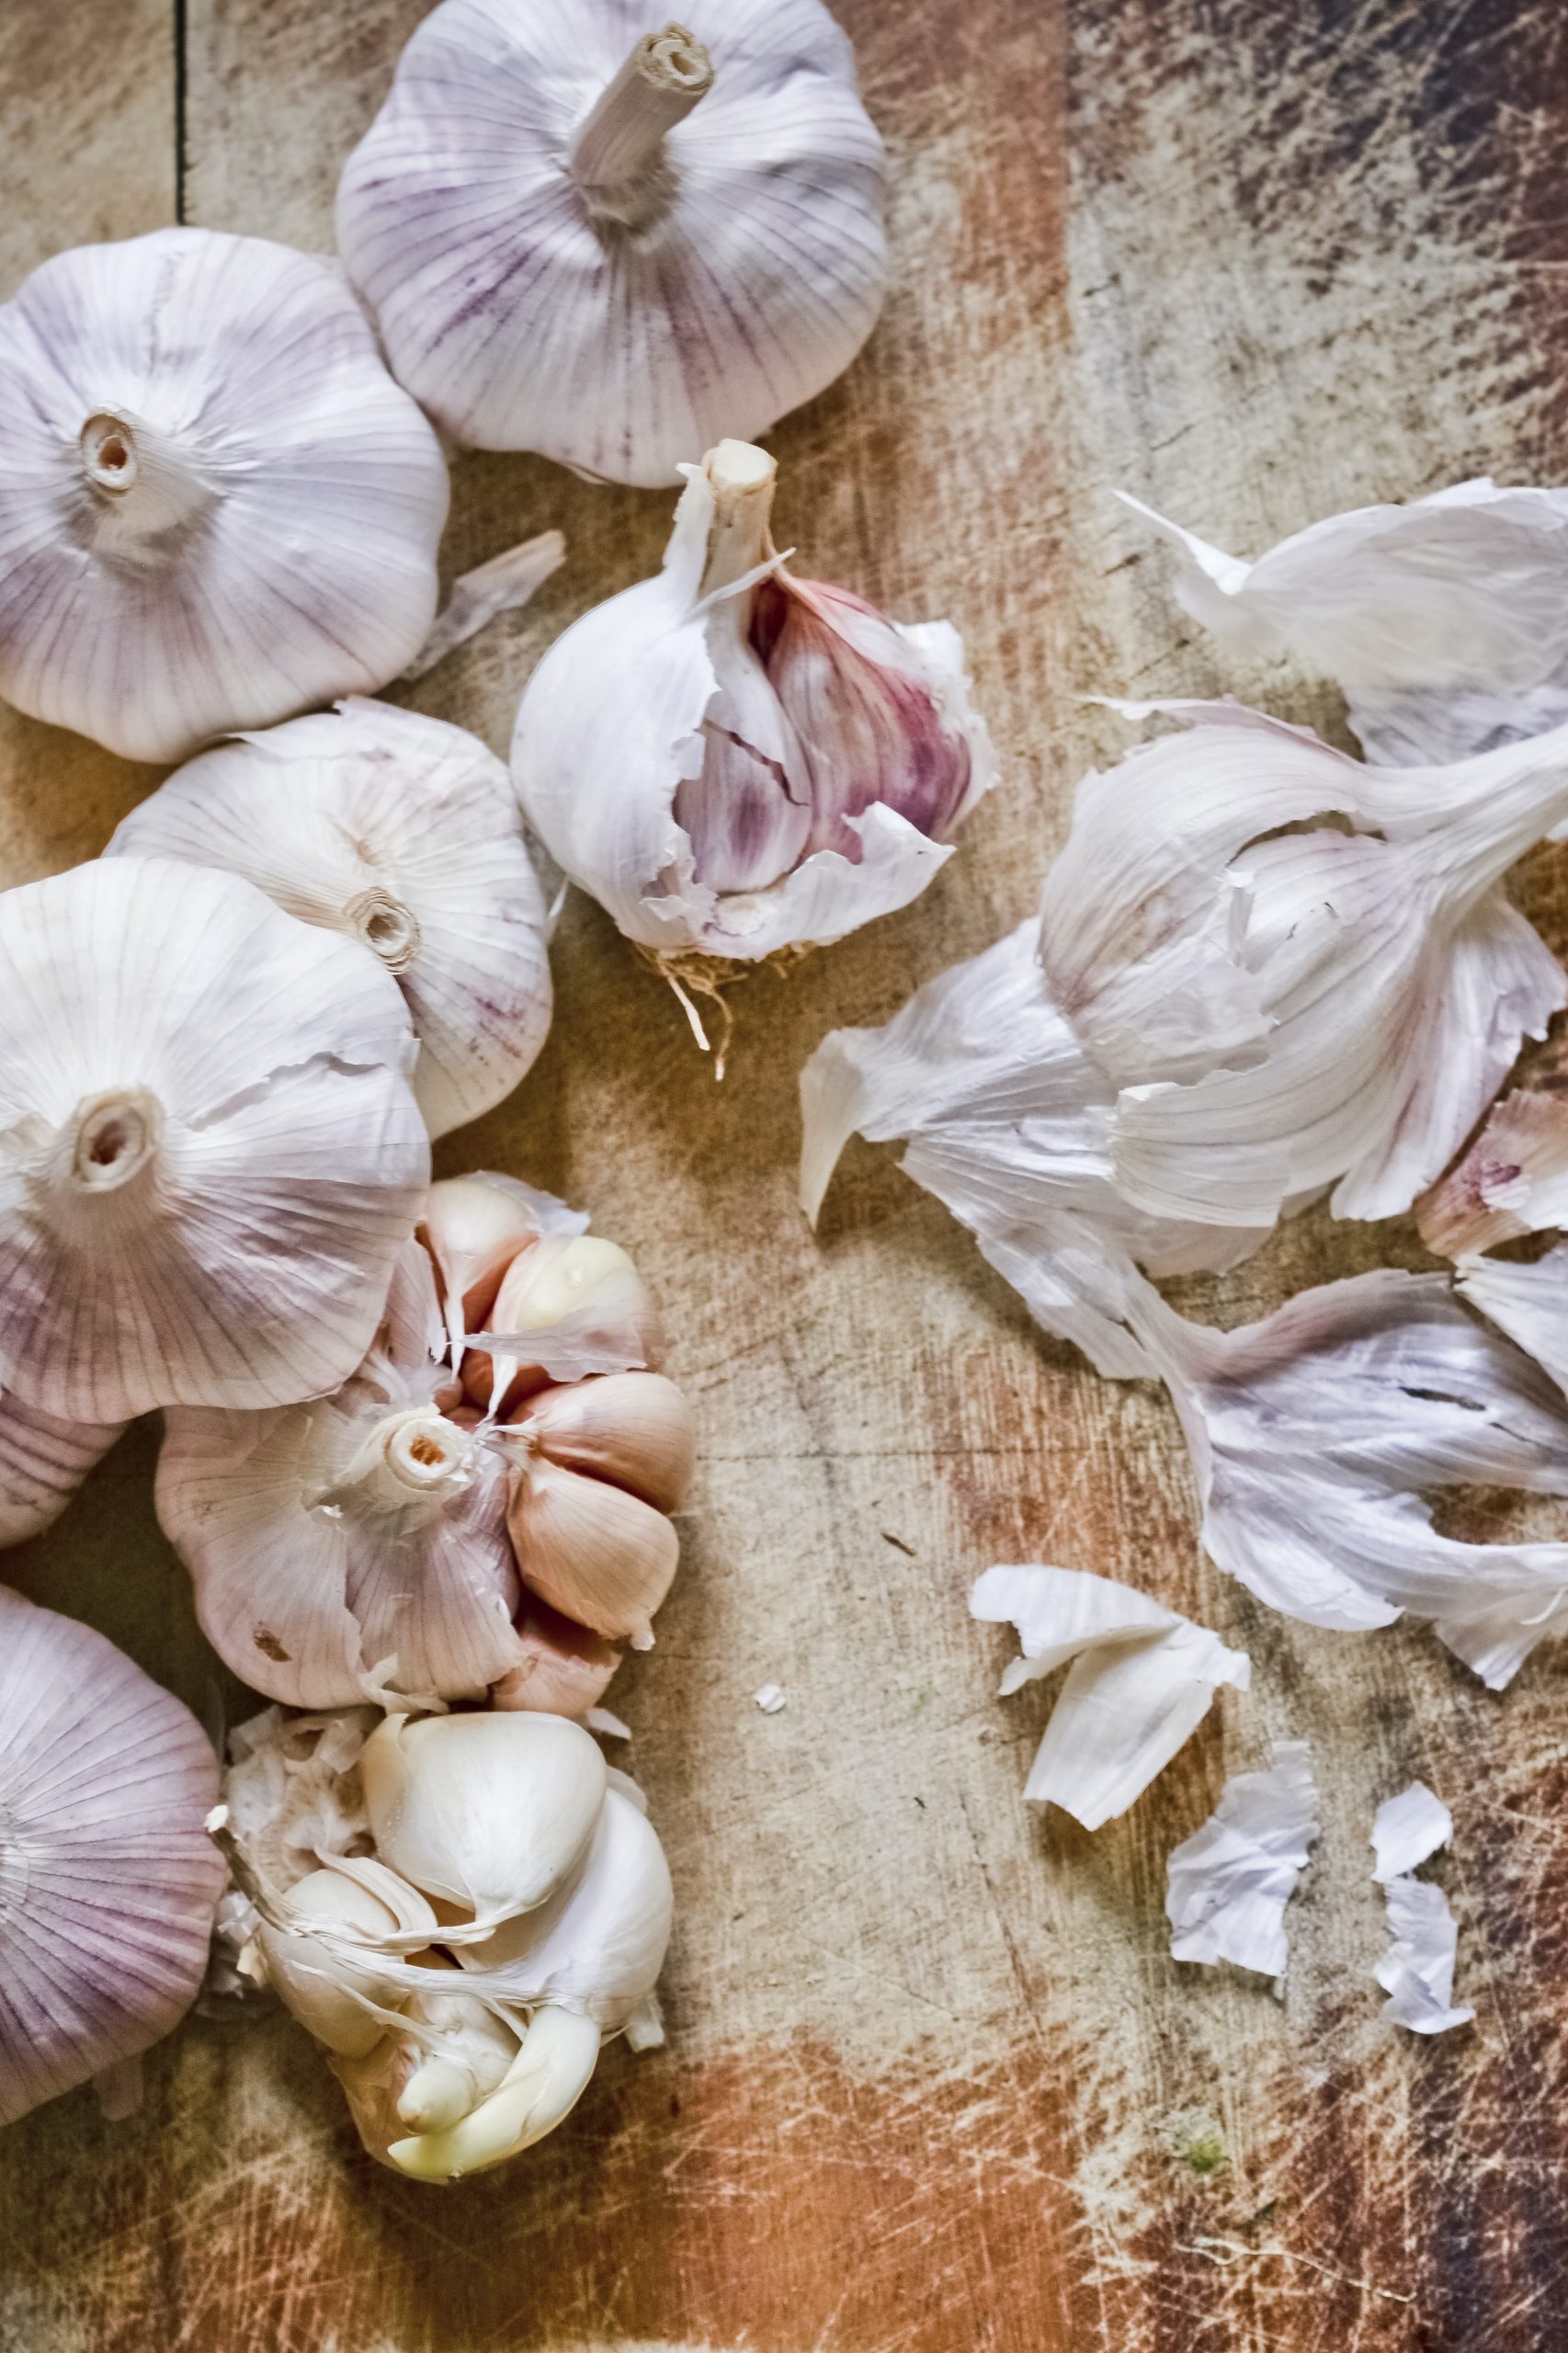 How Many Cloves In A Head Of Garlic?